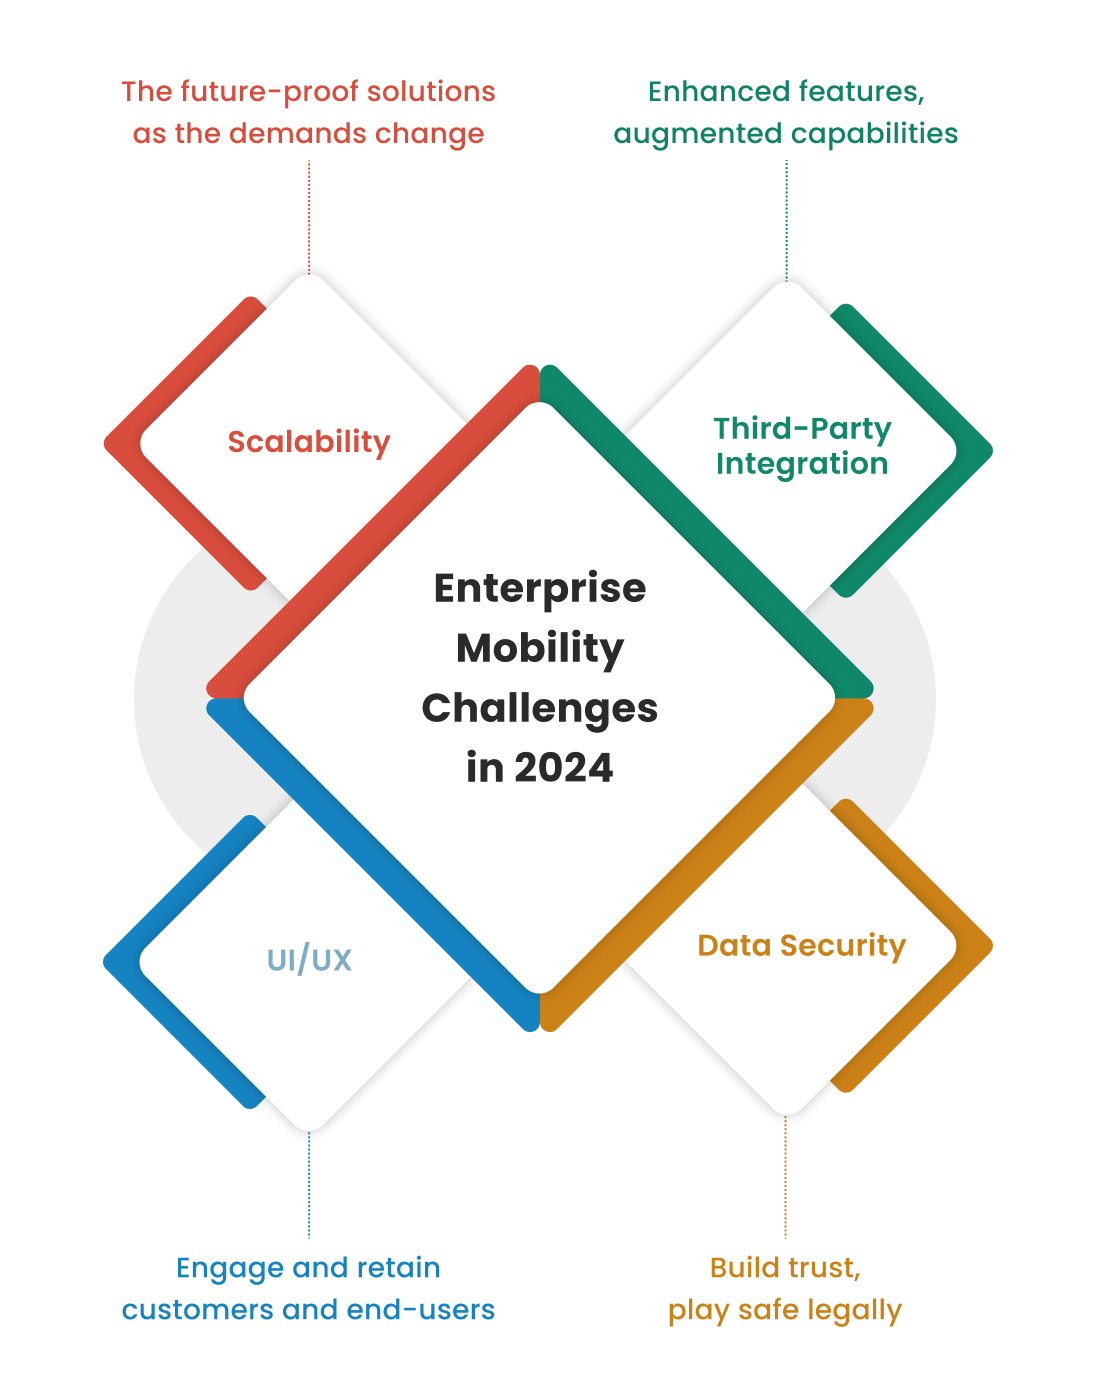 Enterprise Mobility Challenges in 2024